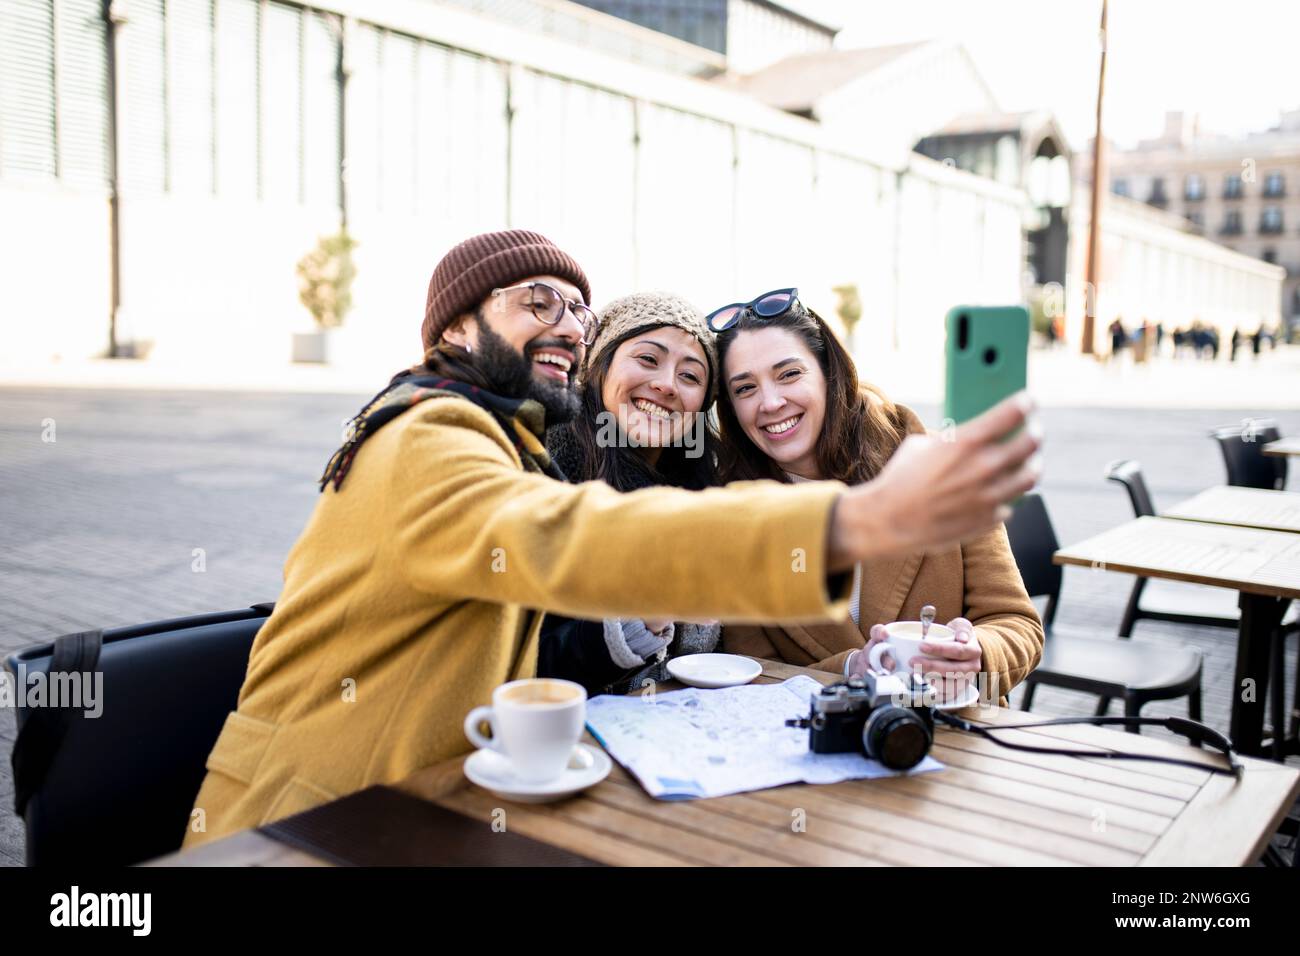 group of three happy friends taking selfie in outdoor cafe on sunny day - cheerful holidays concept Stock Photo